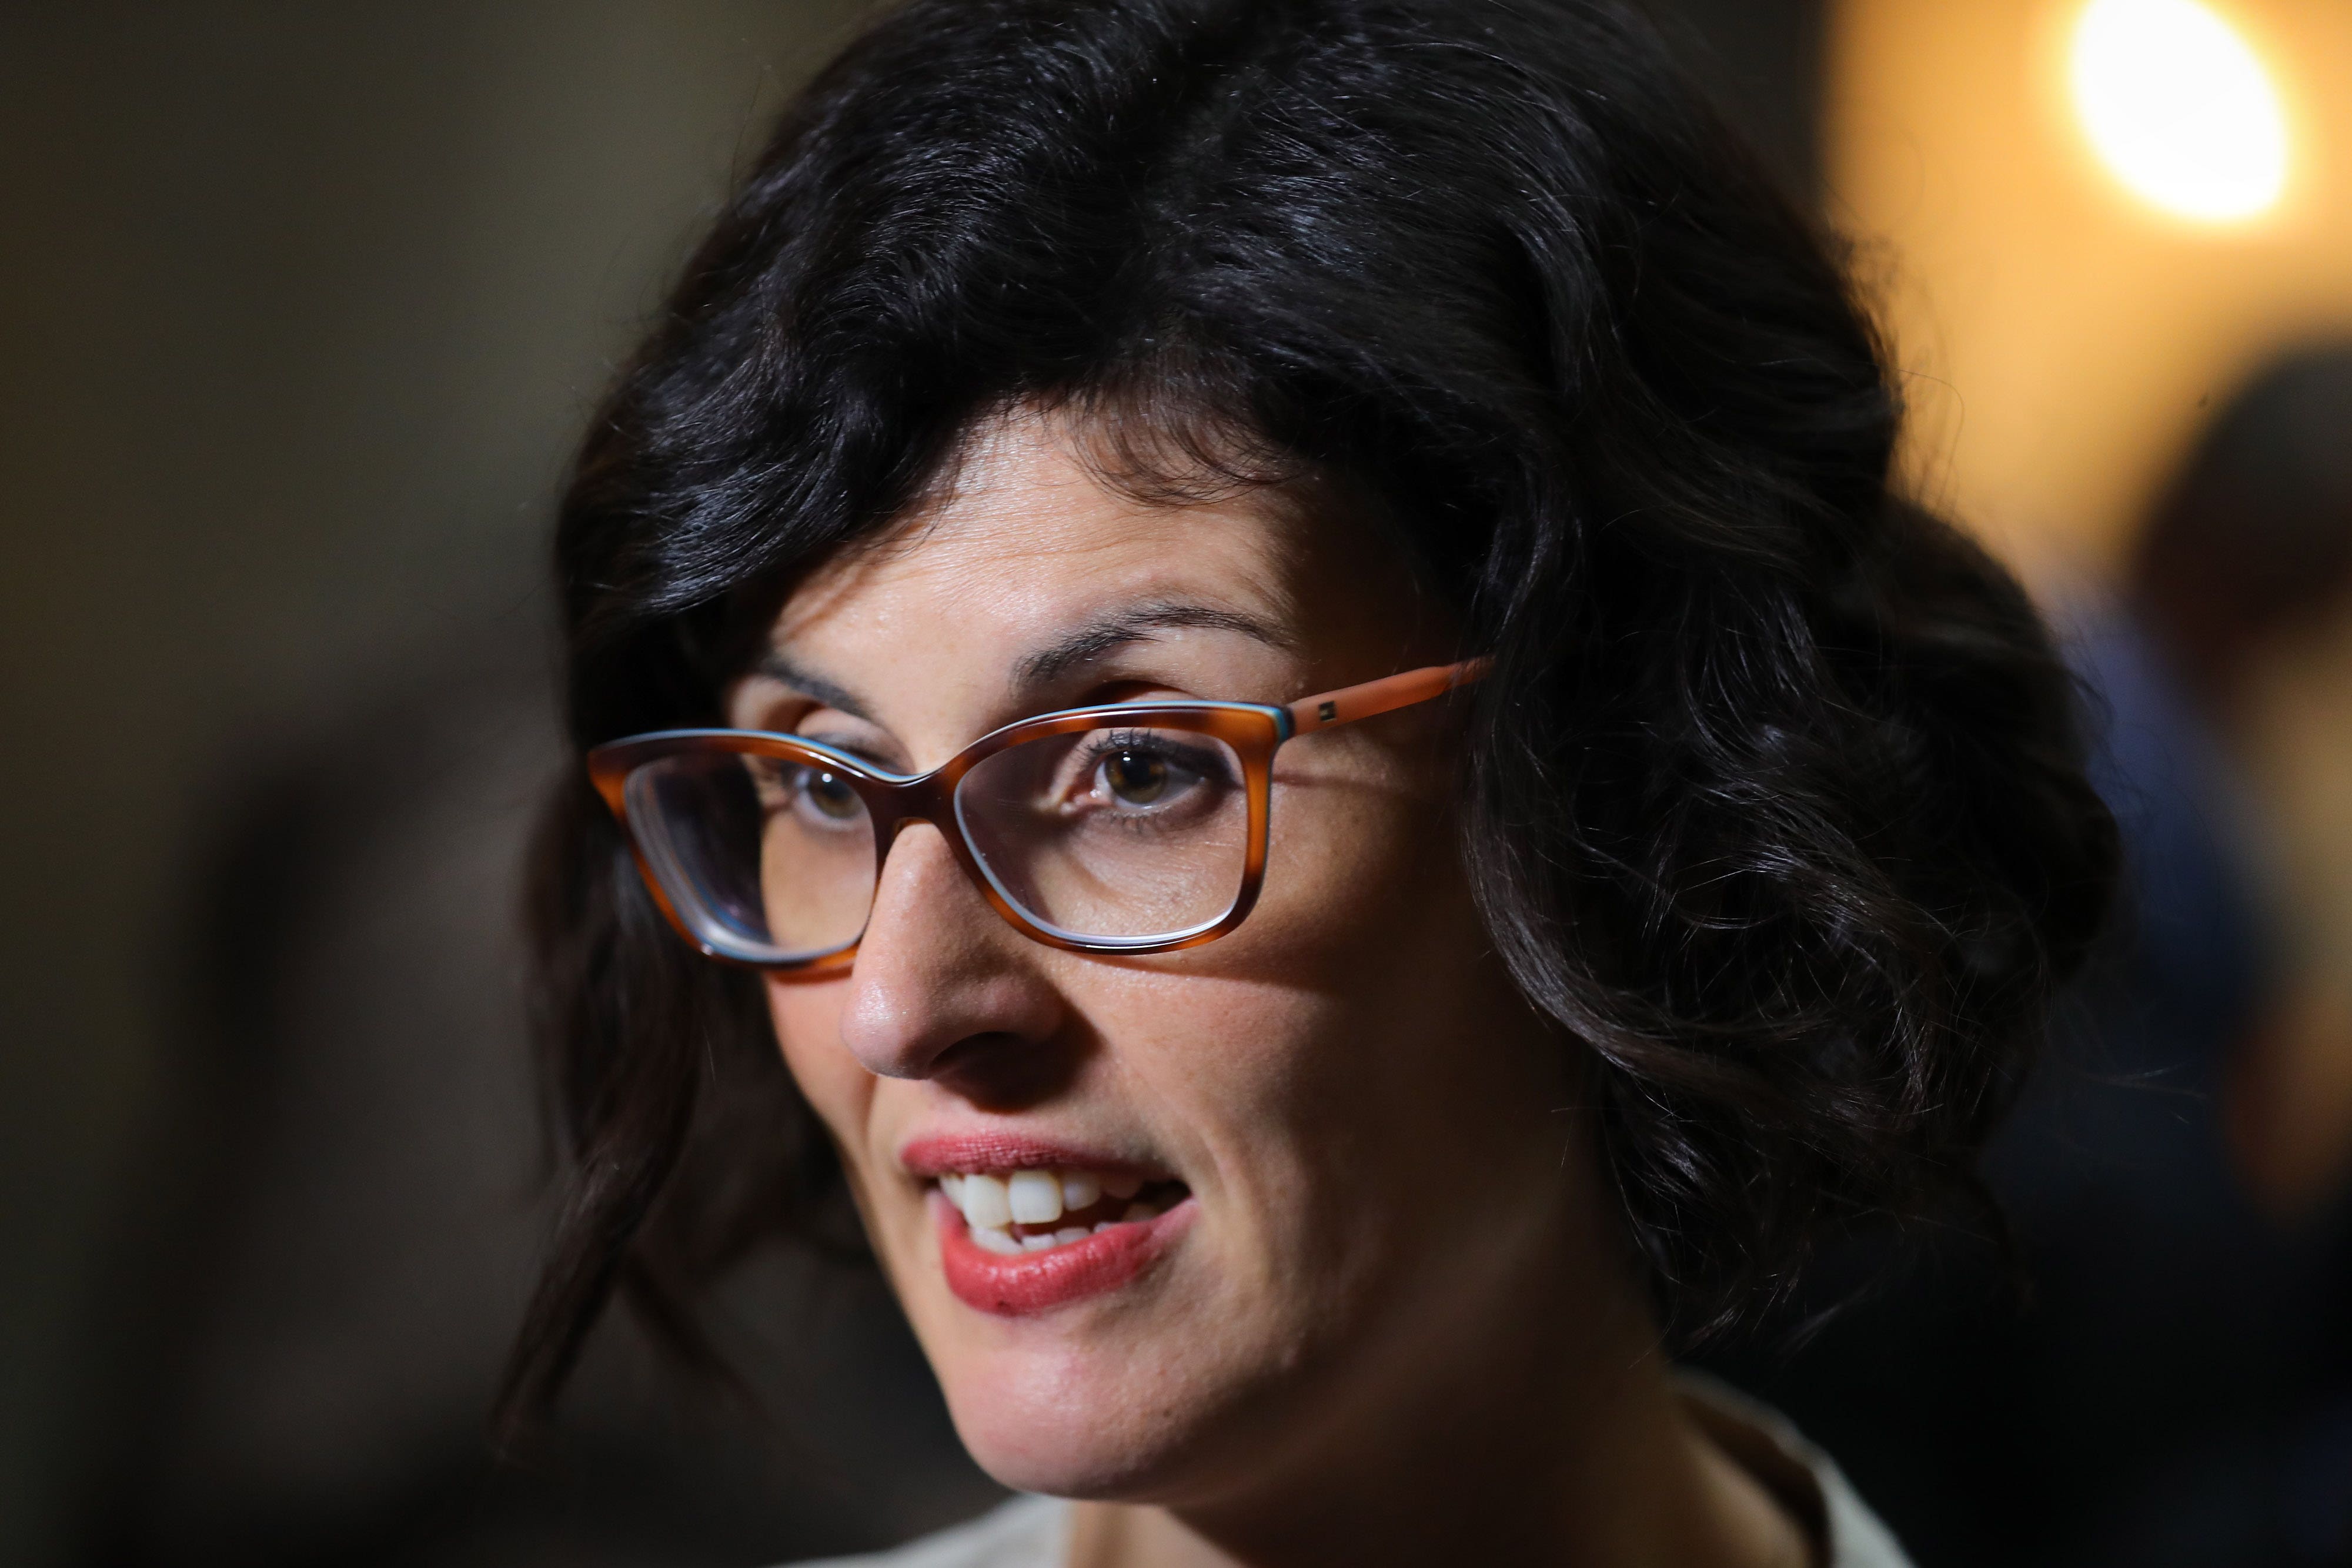 Lib Dem MP Layla Moran has called for a ceasefire in Gaza (Aaron Chown/PA)